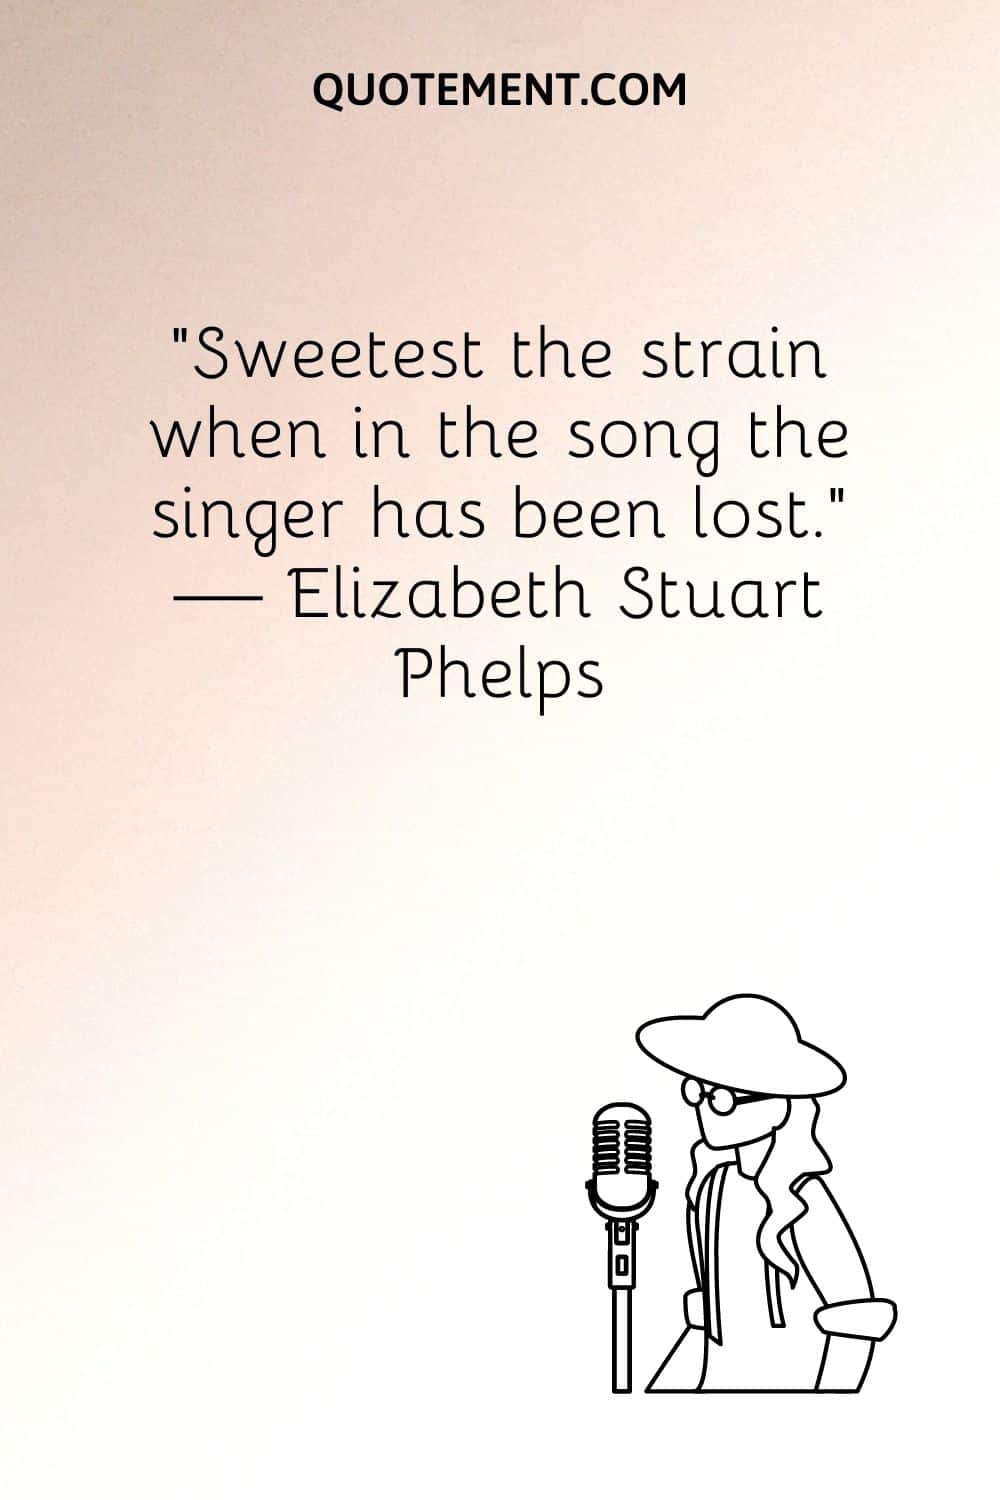 “Sweetest the strain when in the song the singer has been lost.” — Elizabeth Stuart Phelps